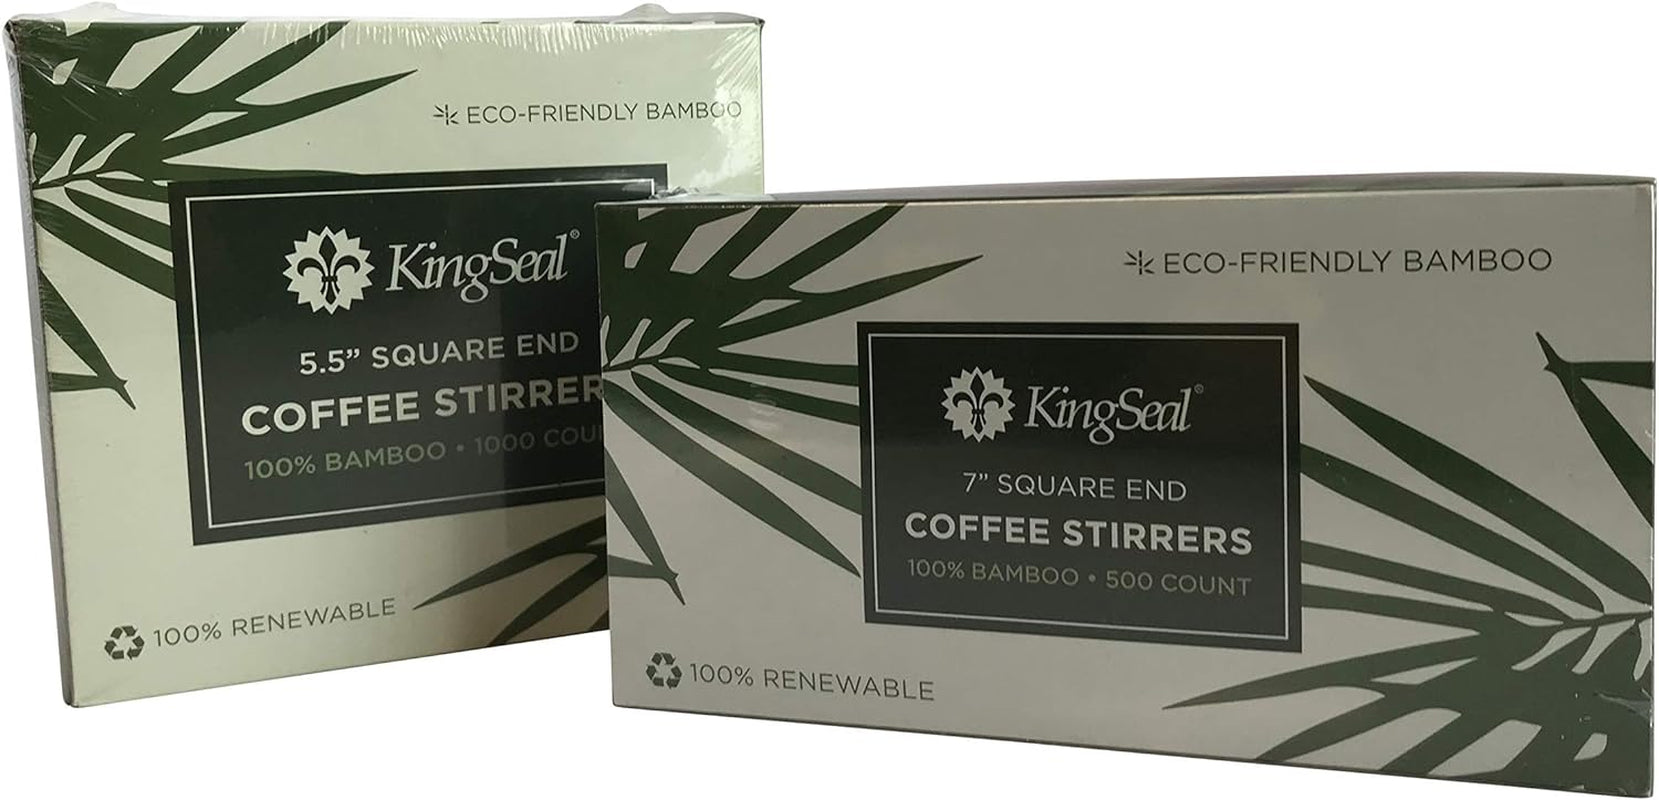 KingSeal Bamboo Coffee Stir Sticks - 55 inches - Square End - Stronger  Thicker - 100 Renewable  Biodegradable - 1000 Stirrers